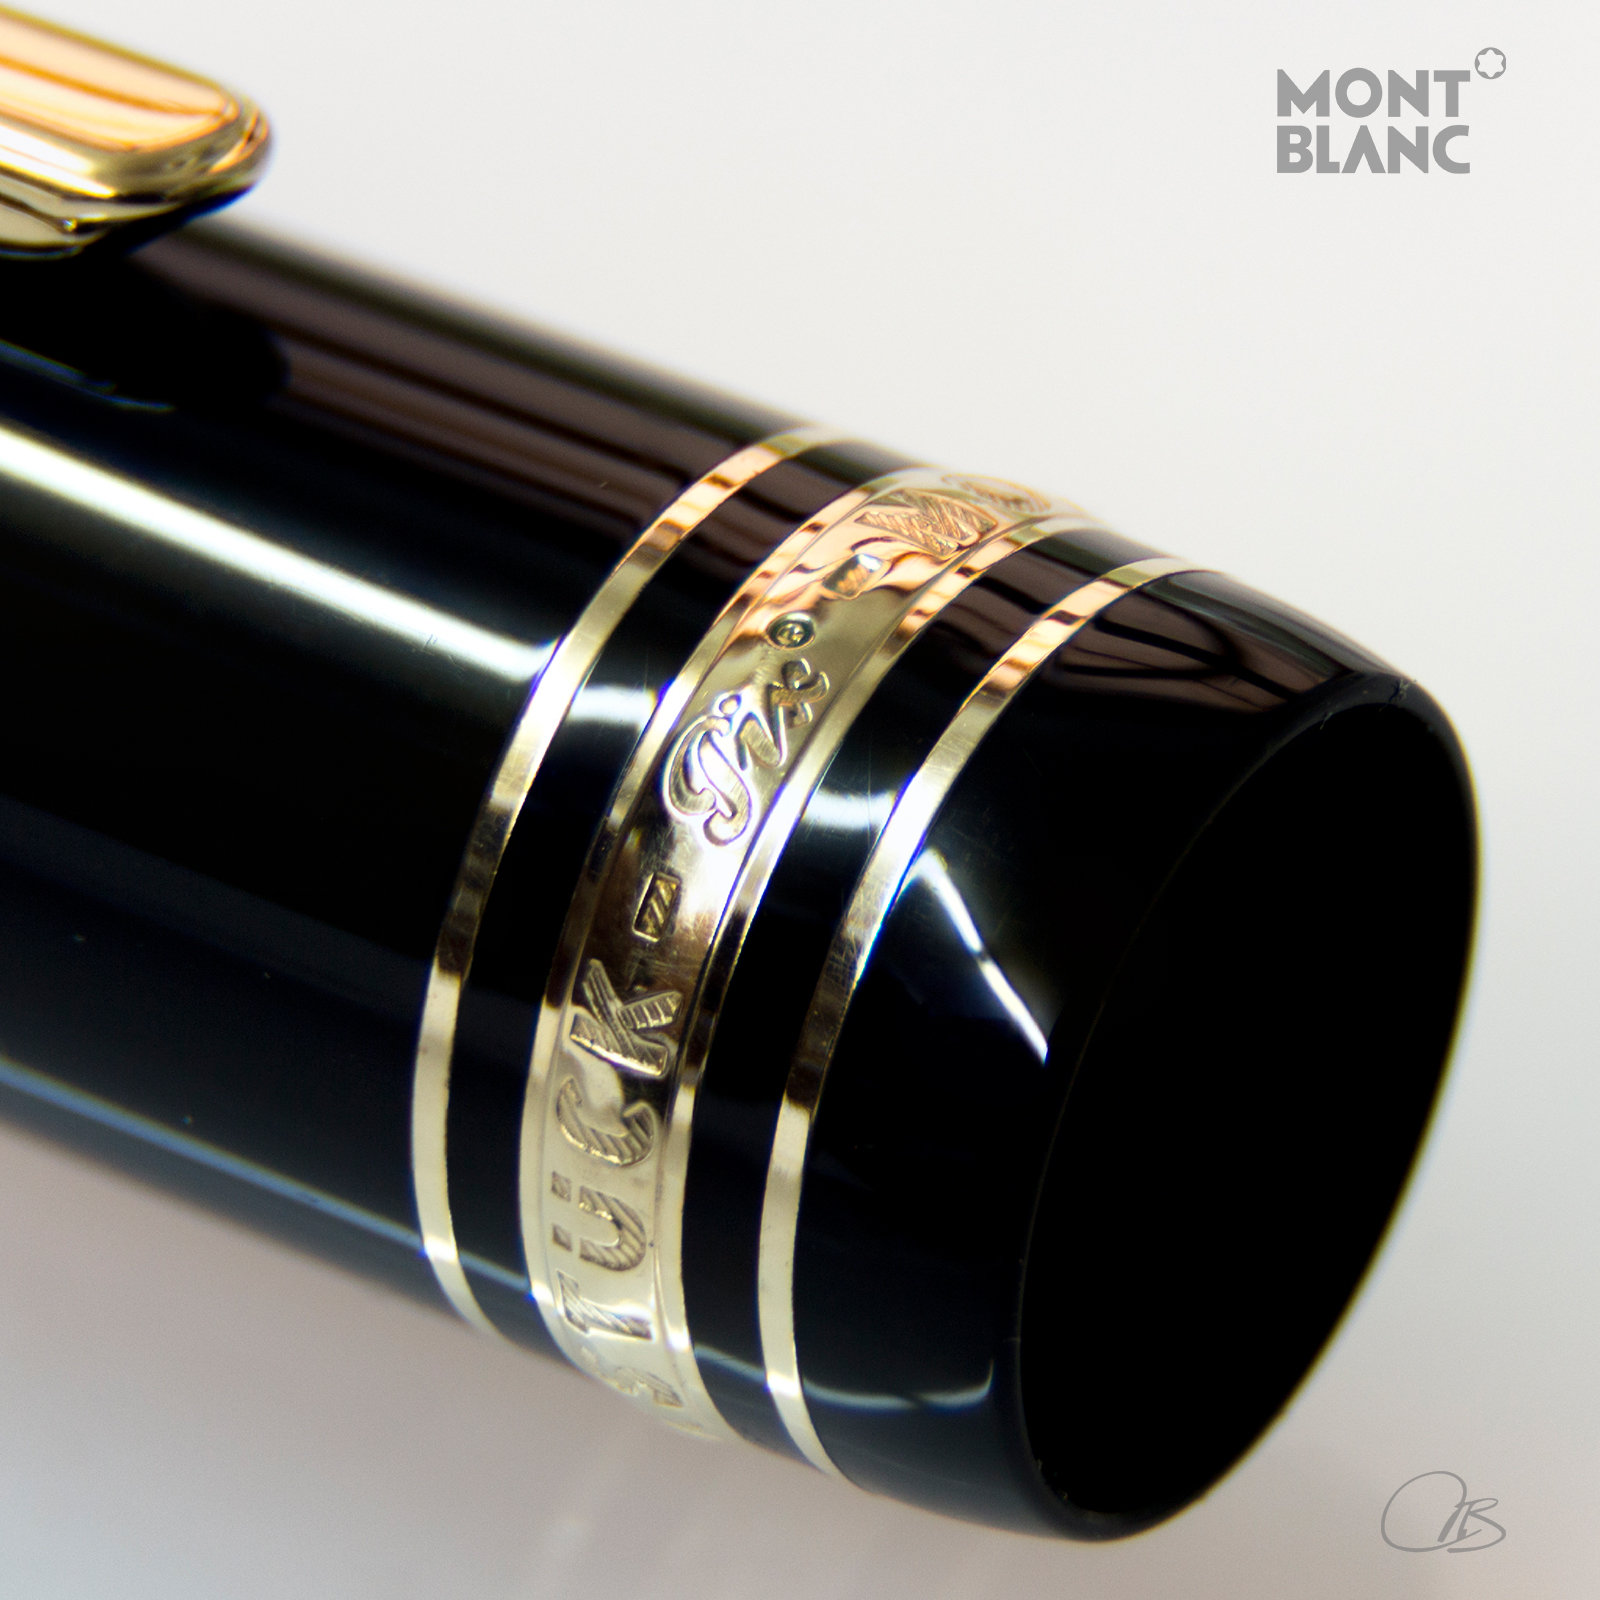 Serial numbers and PIX on the Montblanc pens